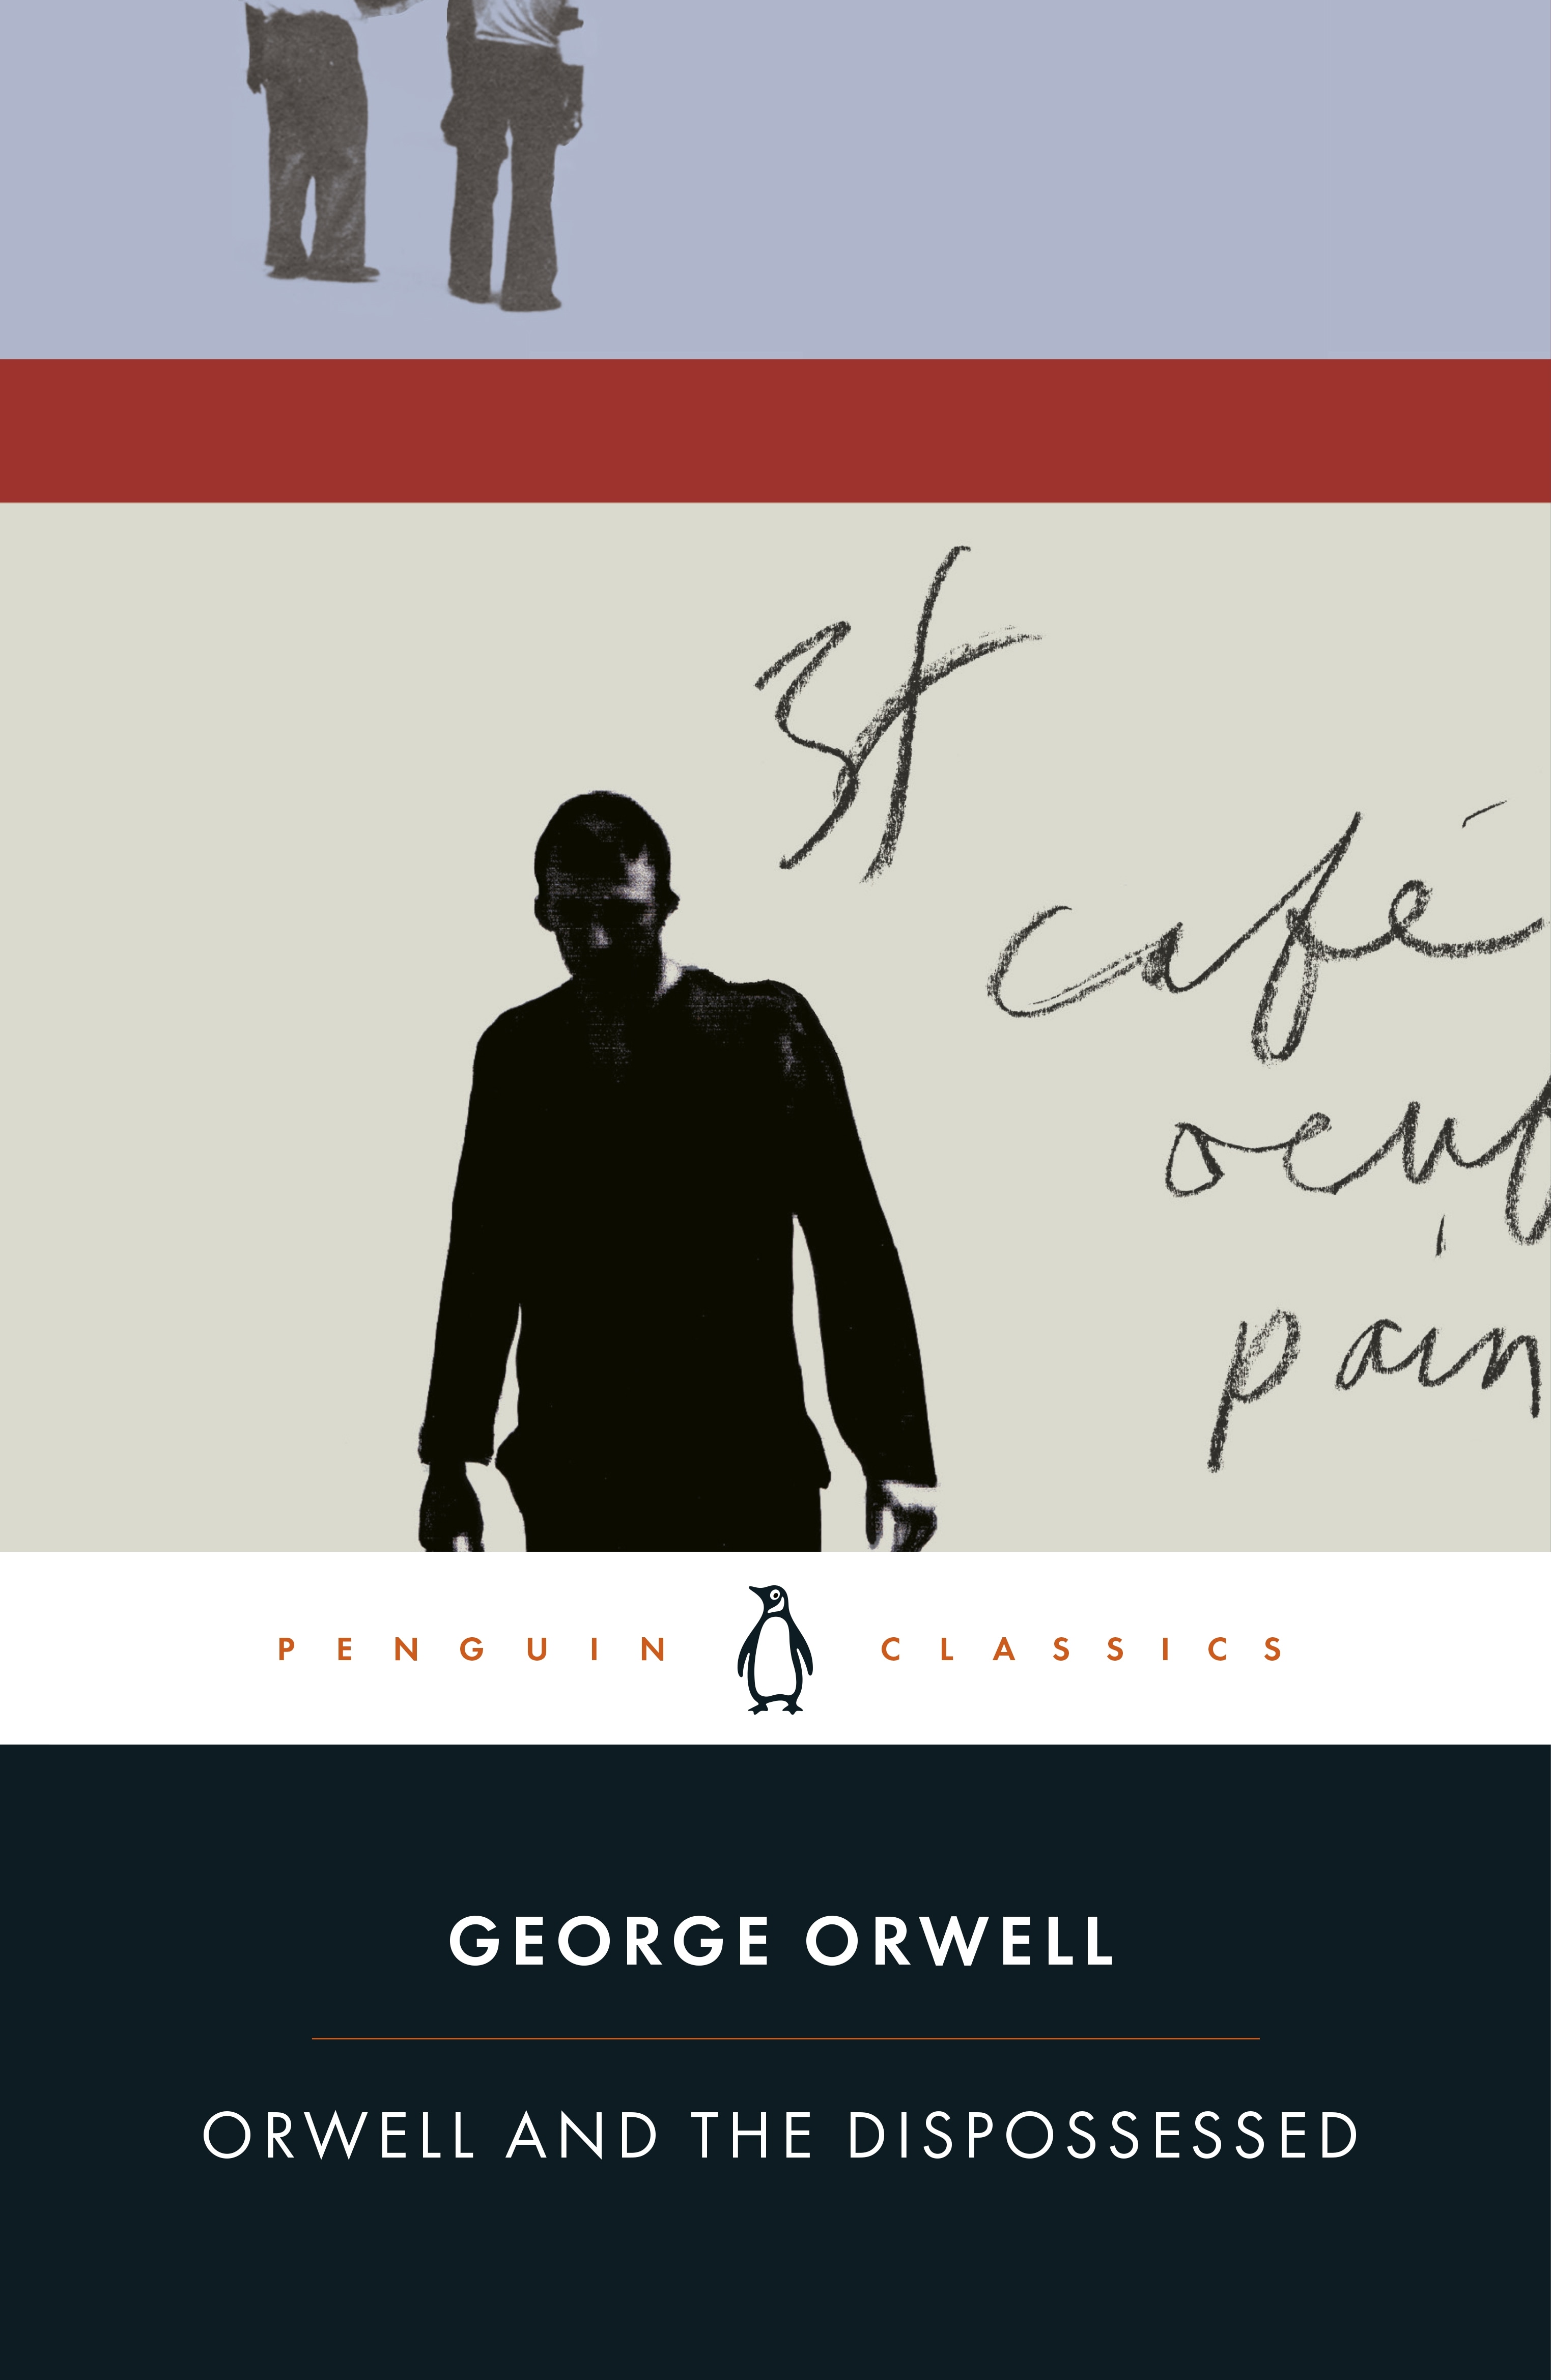 Book “Orwell and the Dispossessed” by George Orwell, Peter Davison — October 1, 2020